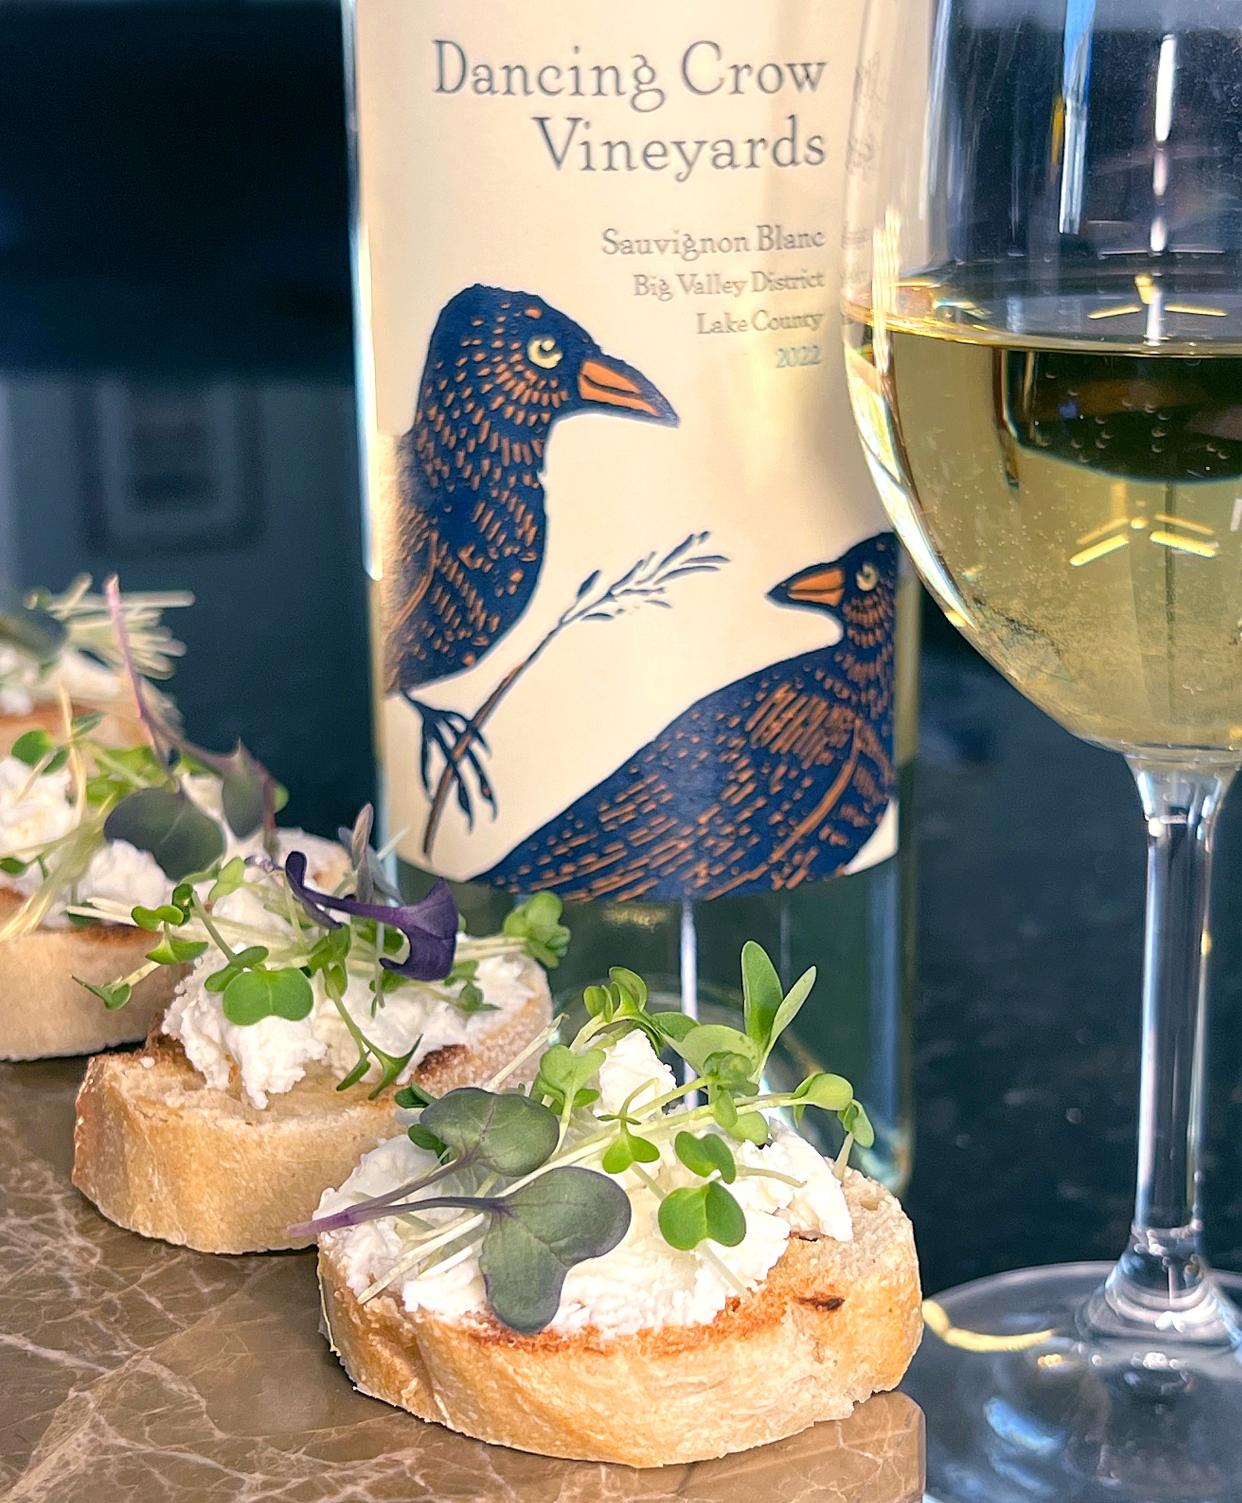 Dancing Crow sauvignon blanc is a wonderful spring wine to have with a goat cheese crostini topped with organic sprouts.